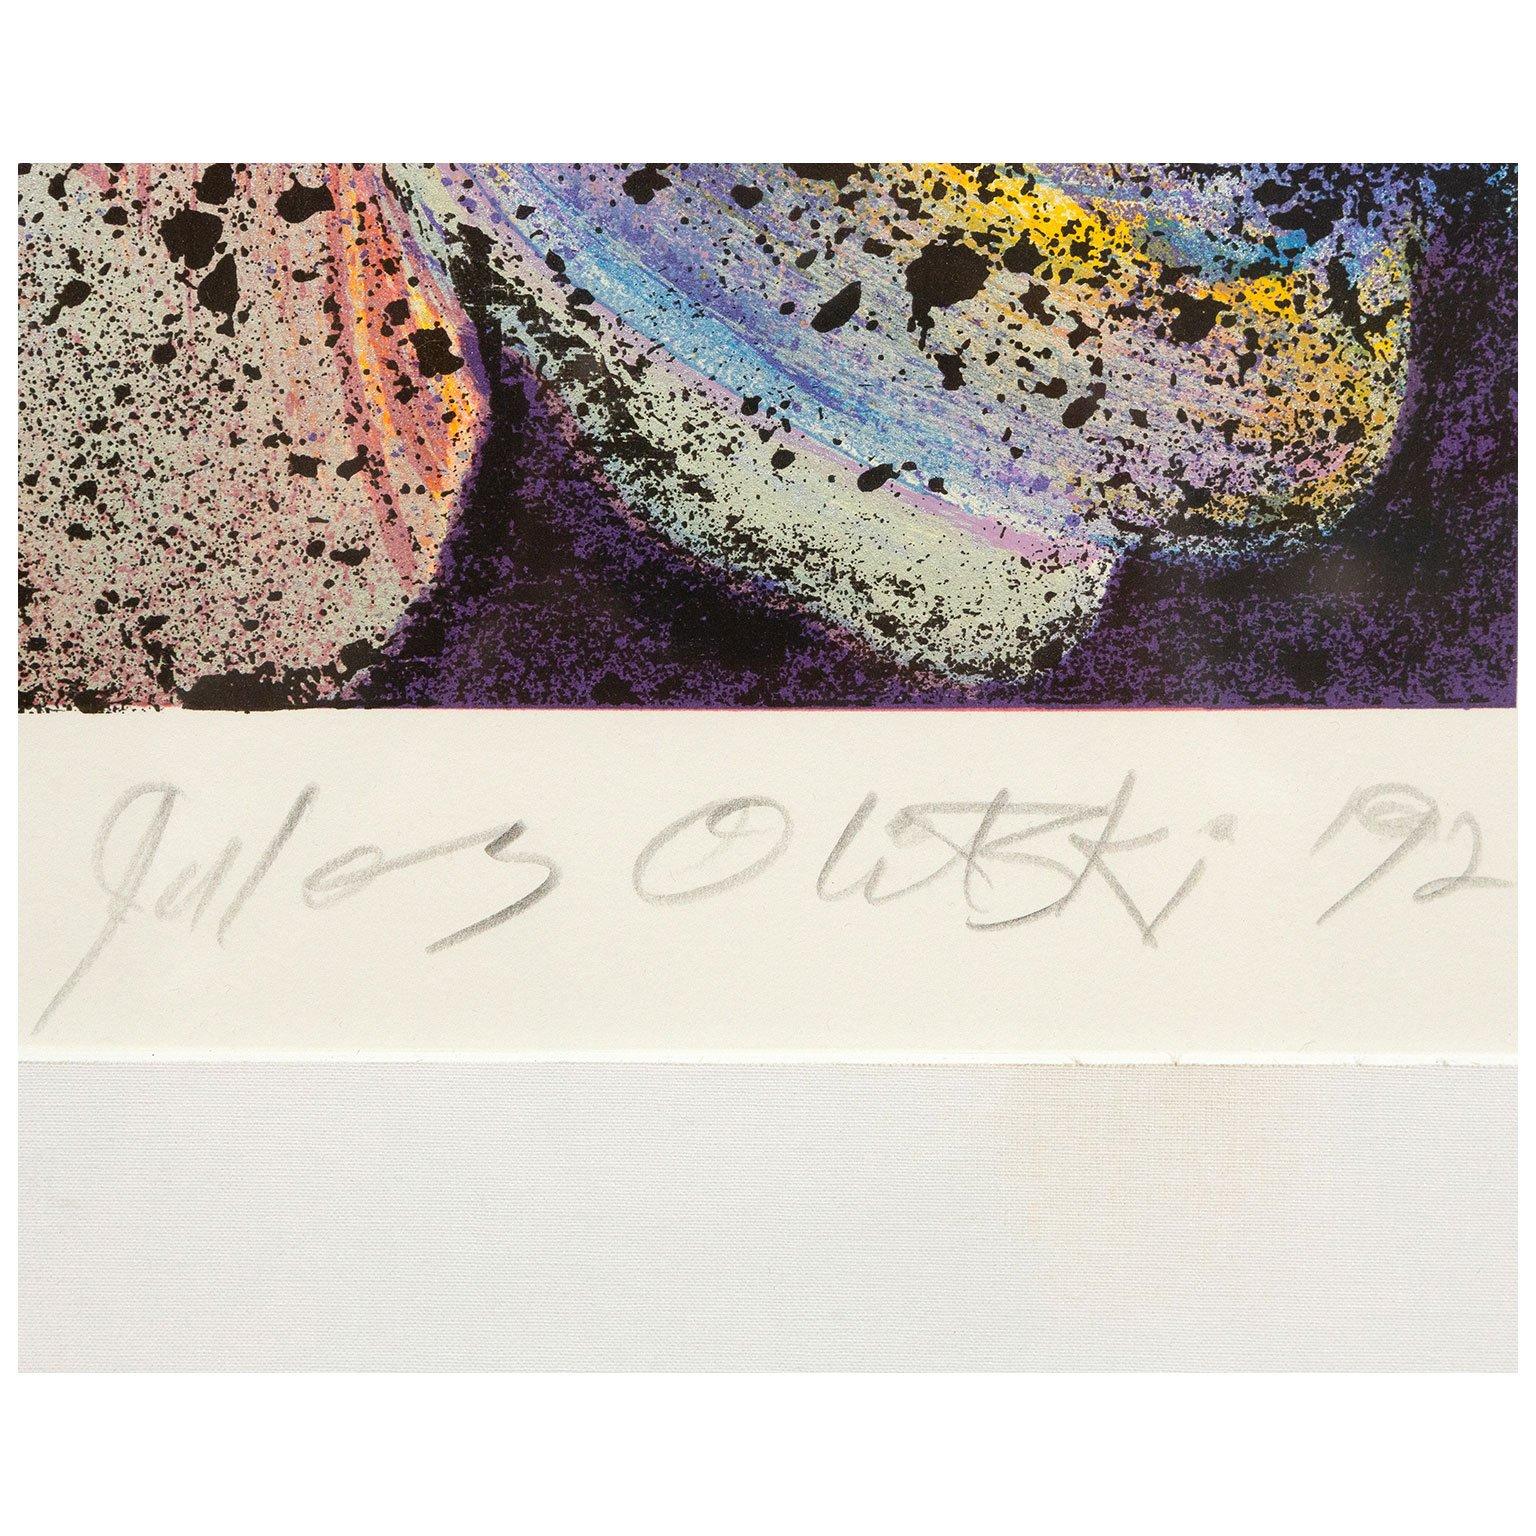 Jules Olitski (1922-2007) is one of Caviar20's favorite abstract artists of the 20th century.  Over the course of his career his aesthetic evolved in startling and fascinating ways.  

In the late 1980's Olitski embarked on a new chapter of